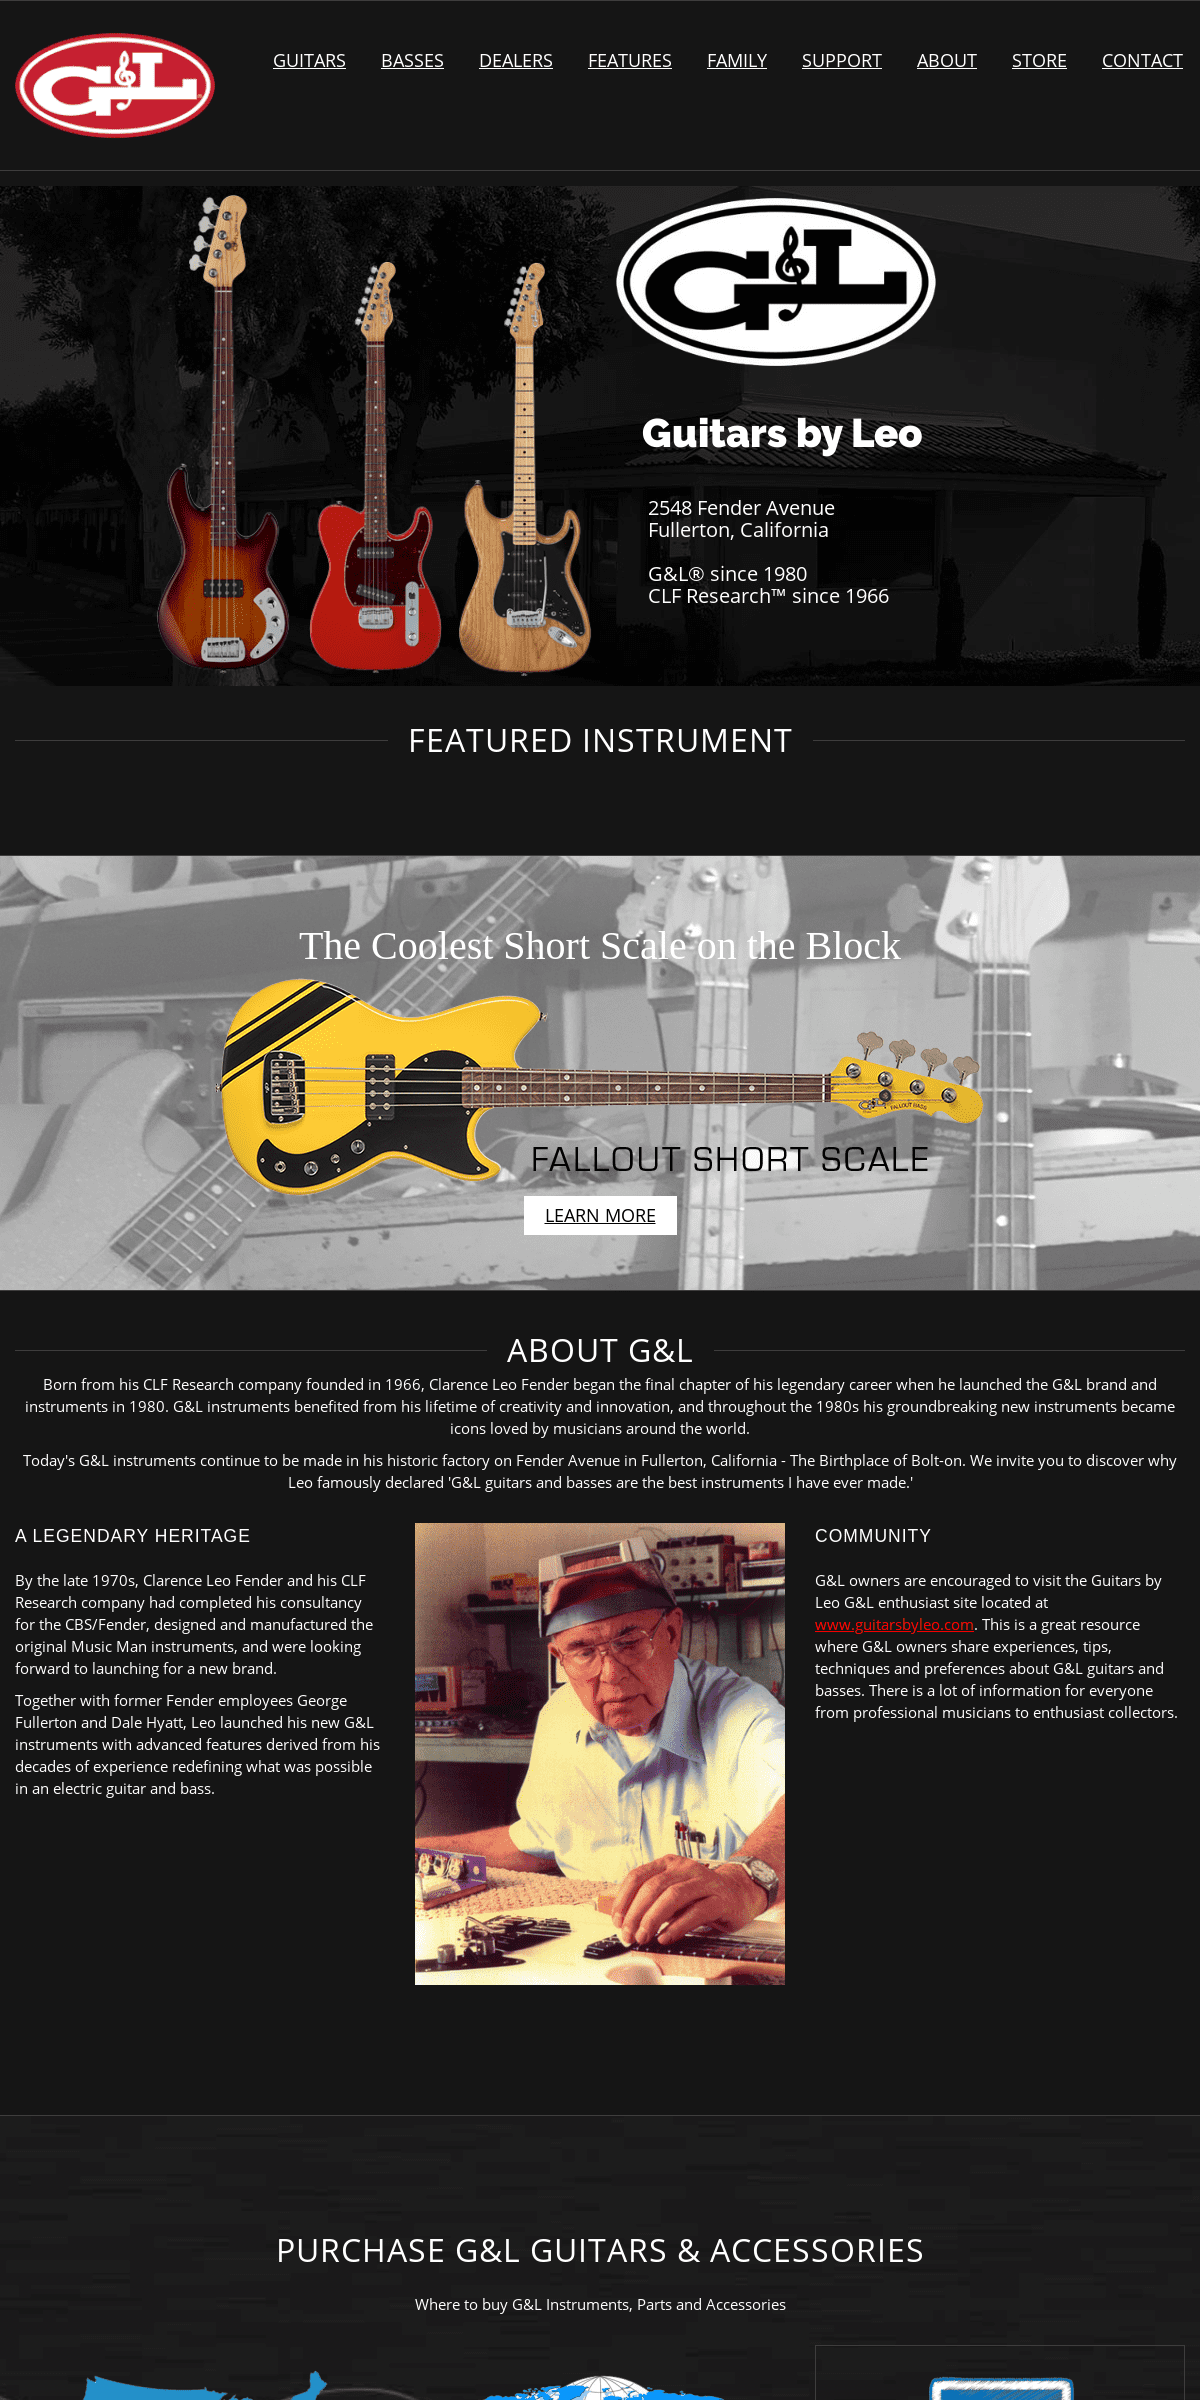 G&L Musical Instruments - Made in Fullerton Since 1980